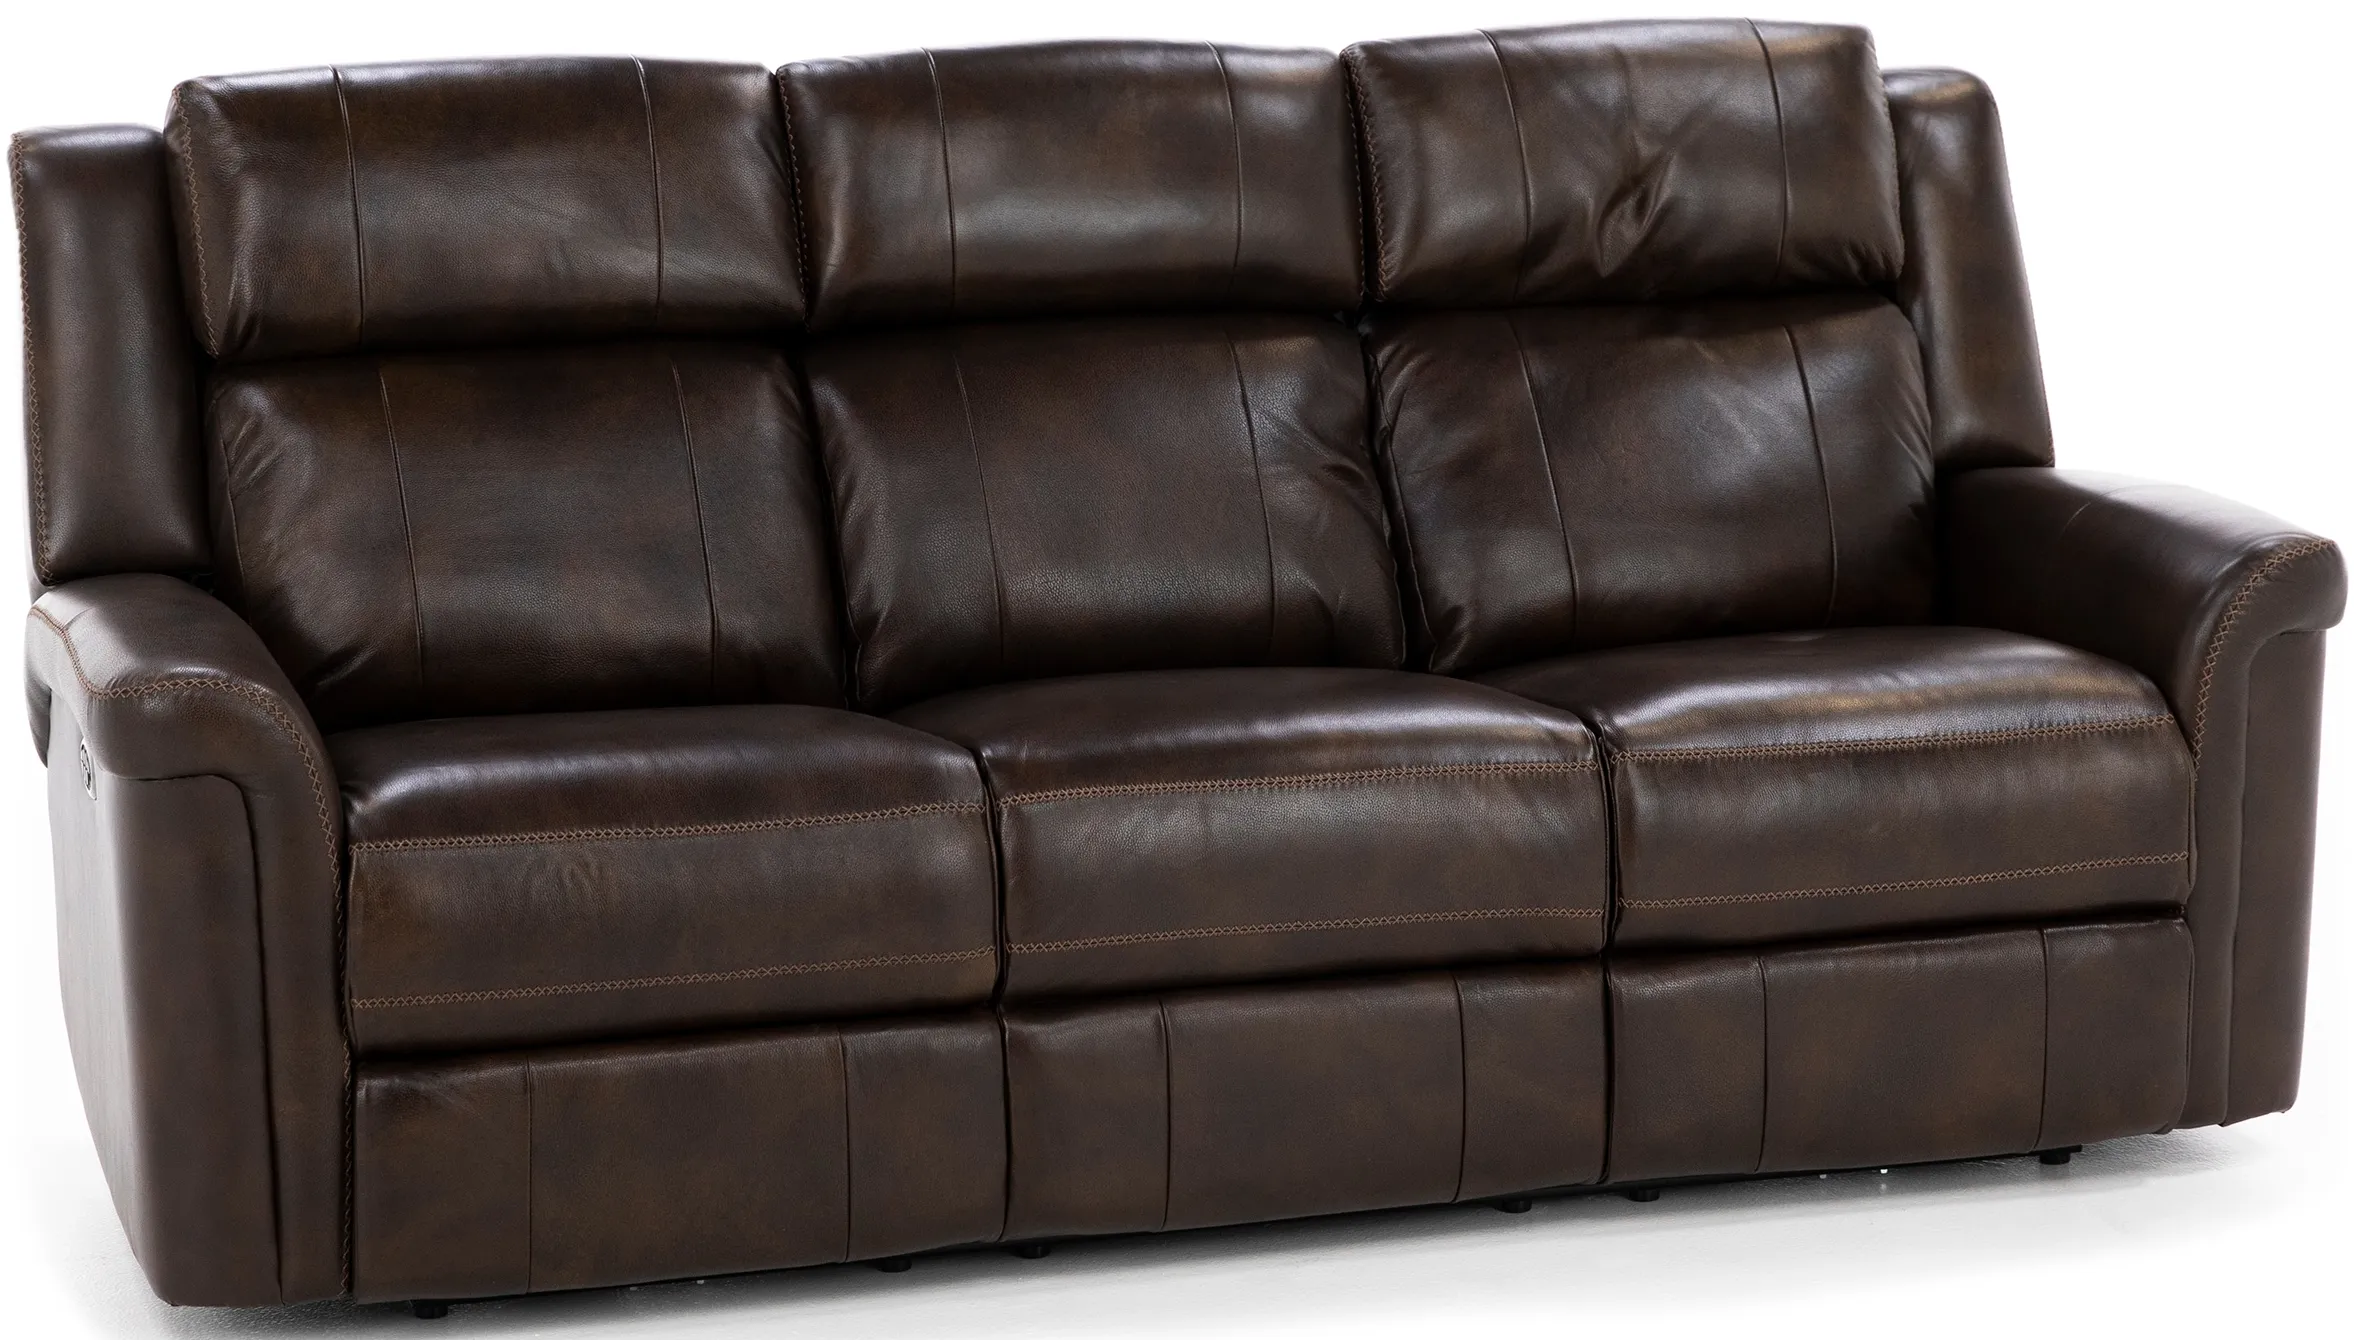 Direct Design Chicago Leather Fully Loaded Reclining Sofa with Drop Down Table